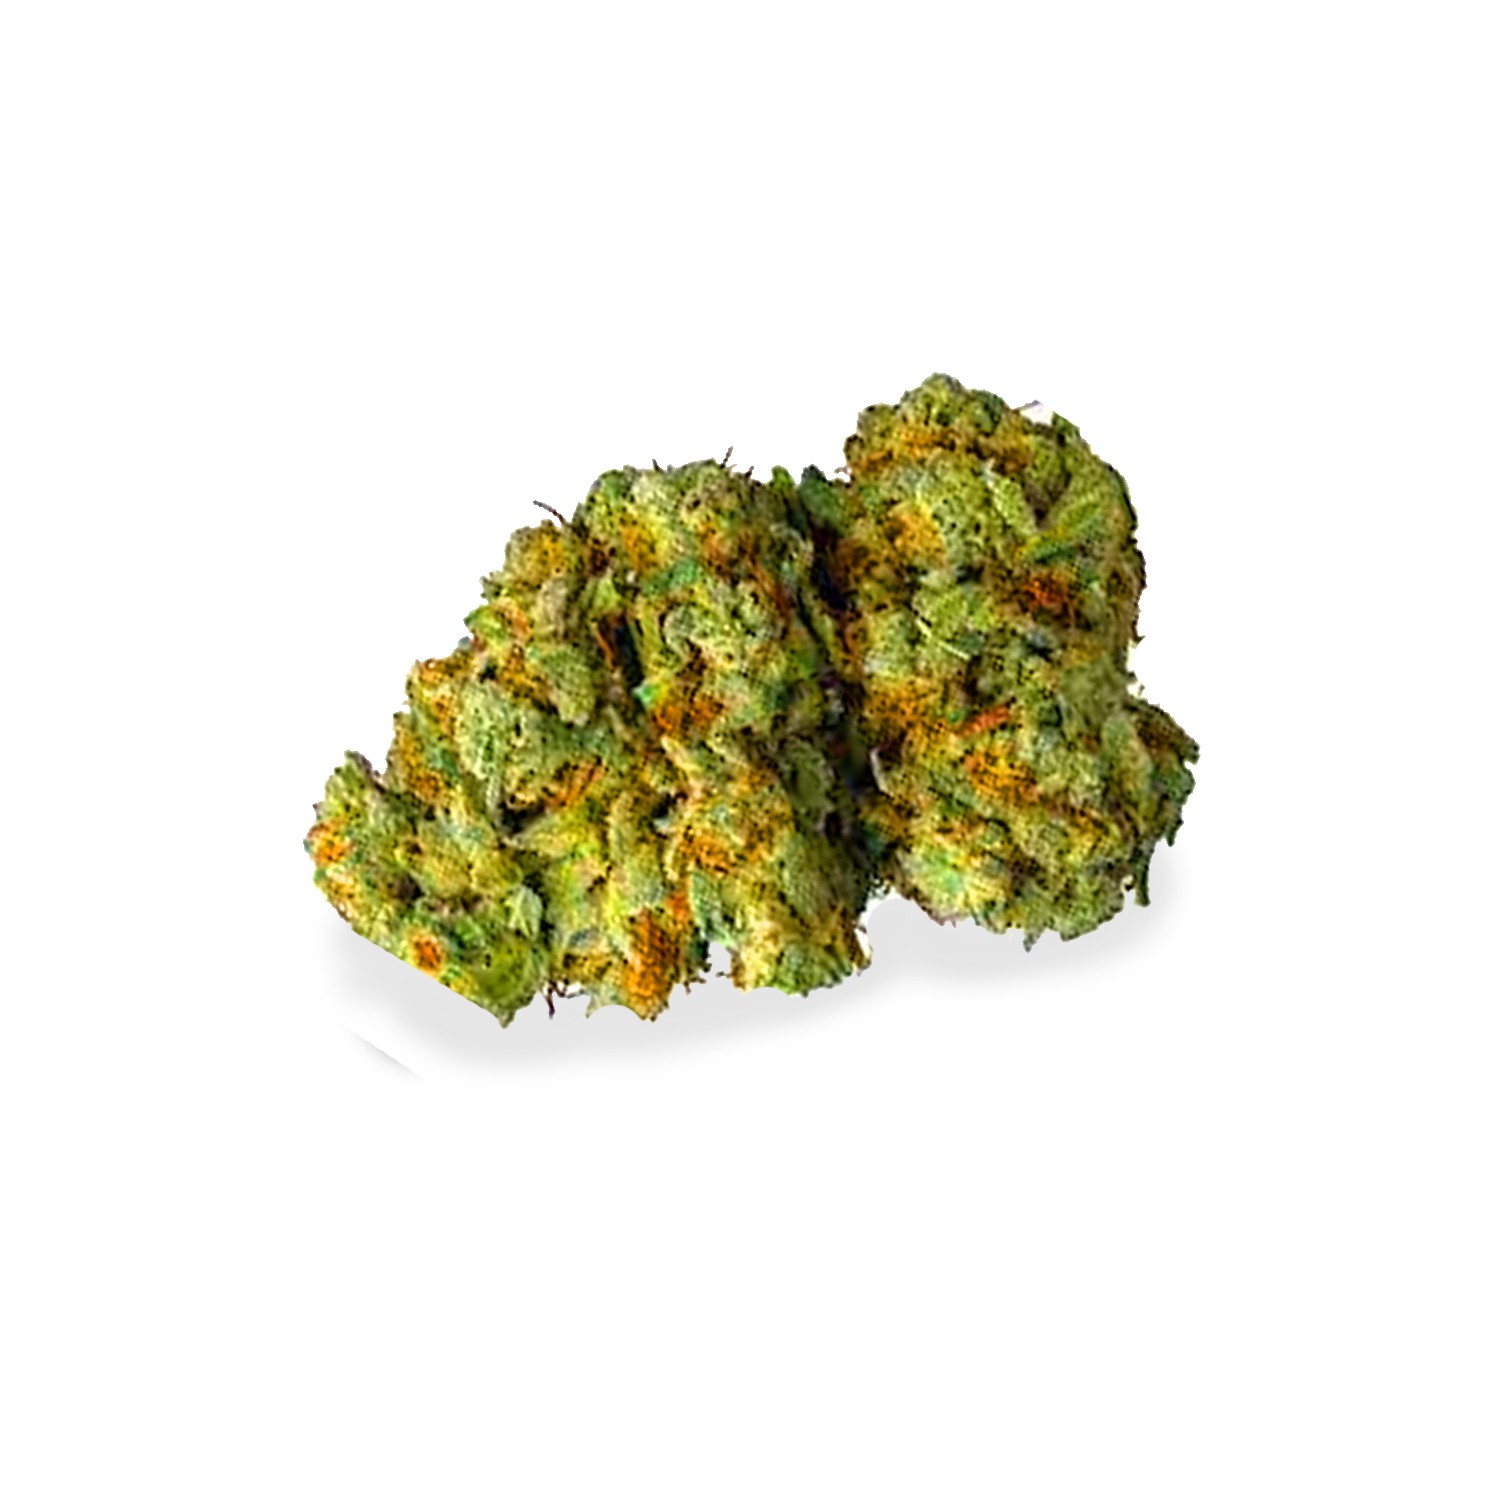 northern lights strain review